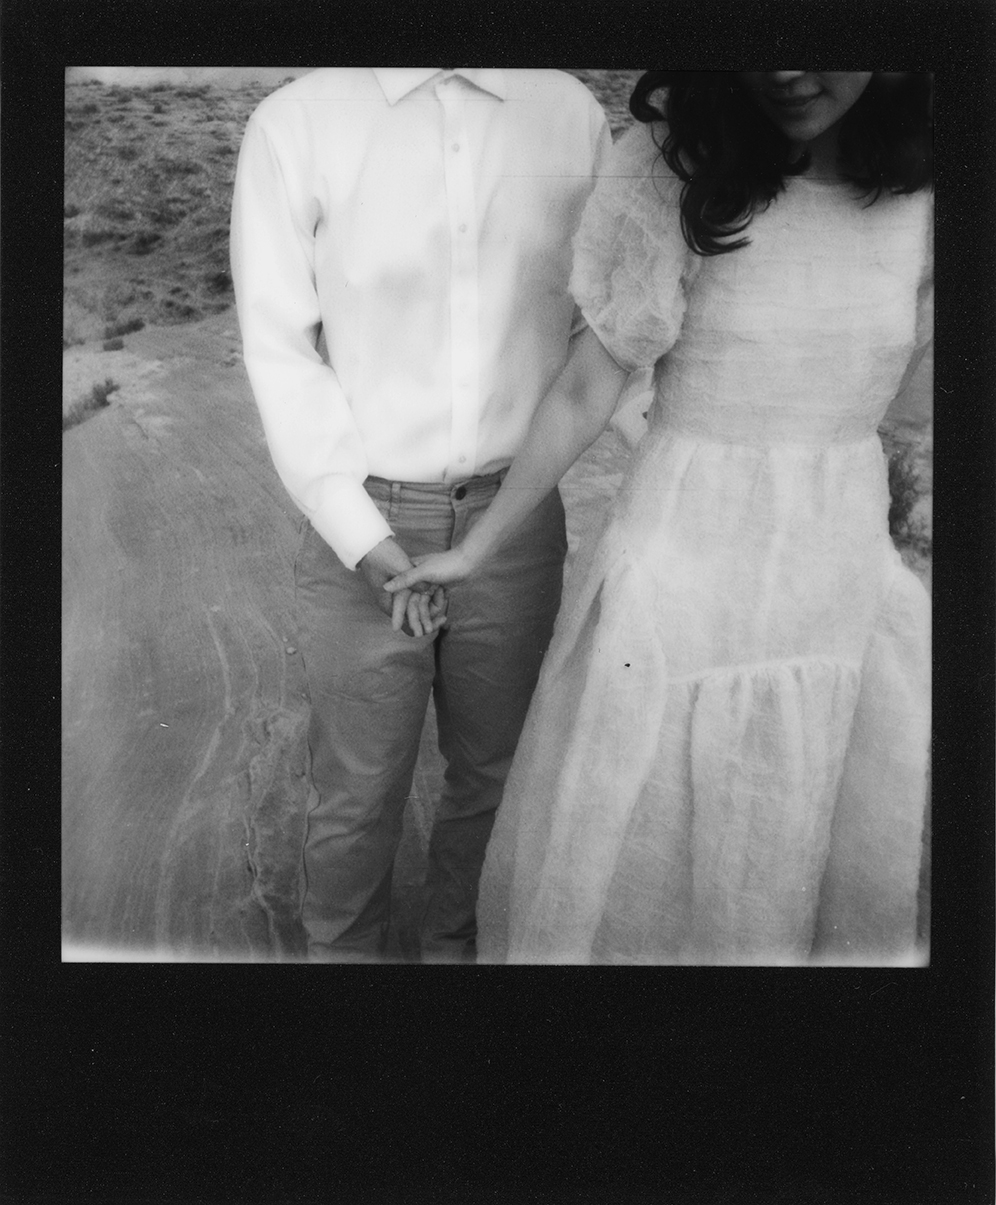 Black bordered Poloroid of people holding hands in the Utah dessert.